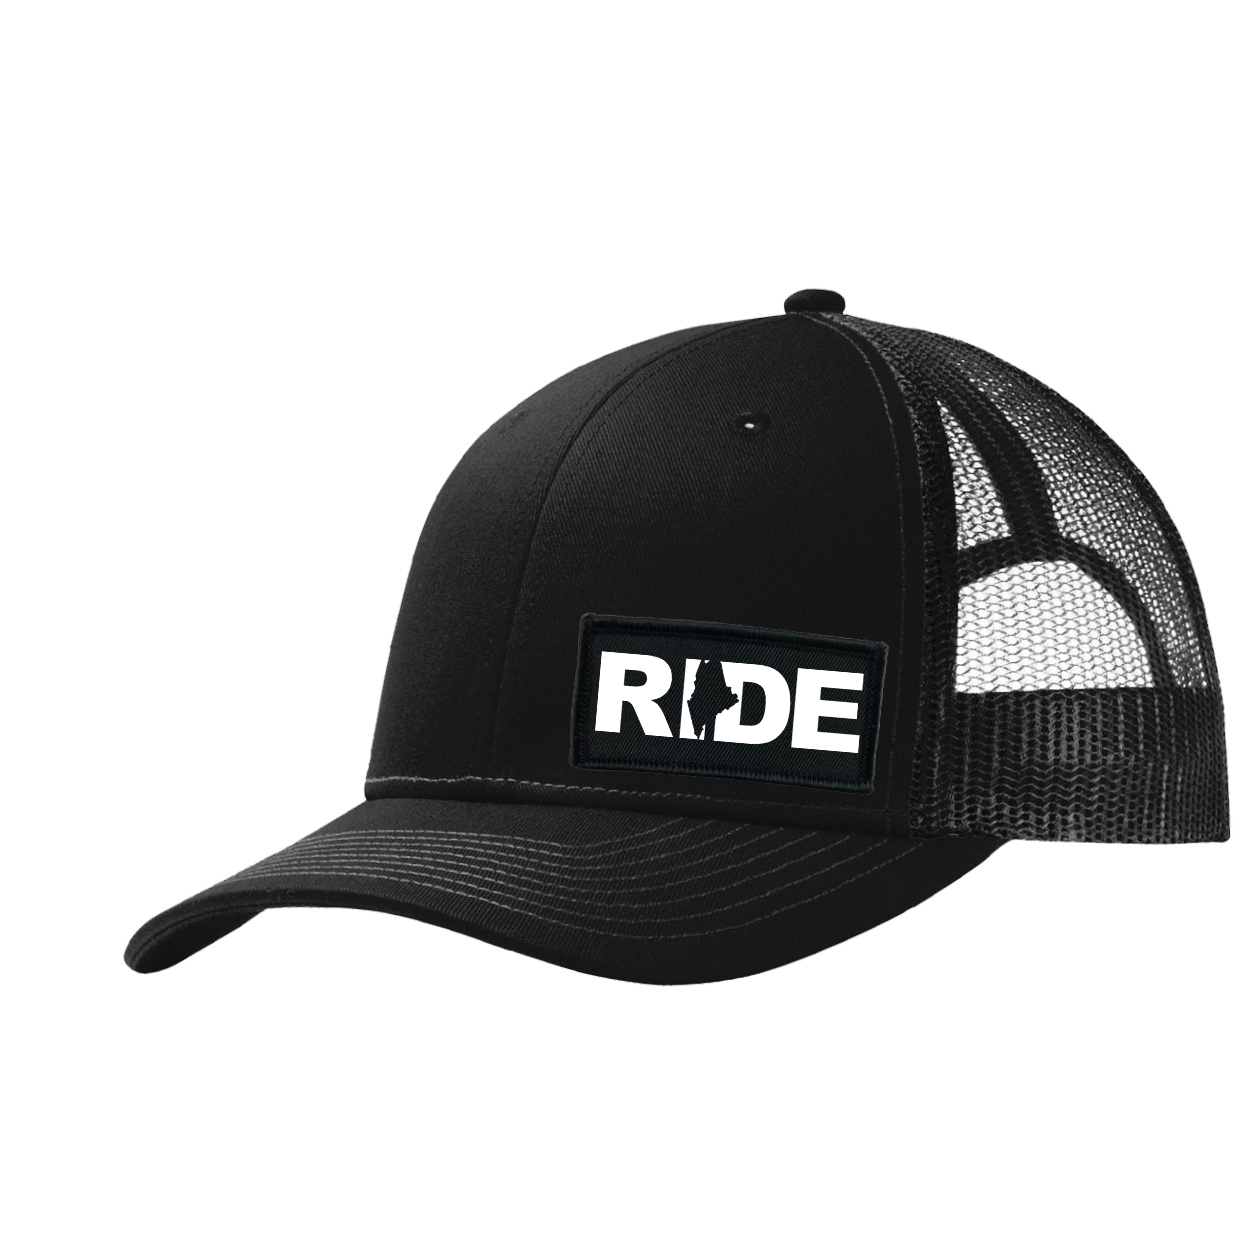 Ride Maine Night Out Woven Patch Snapback Trucker Hat Black (White Logo)